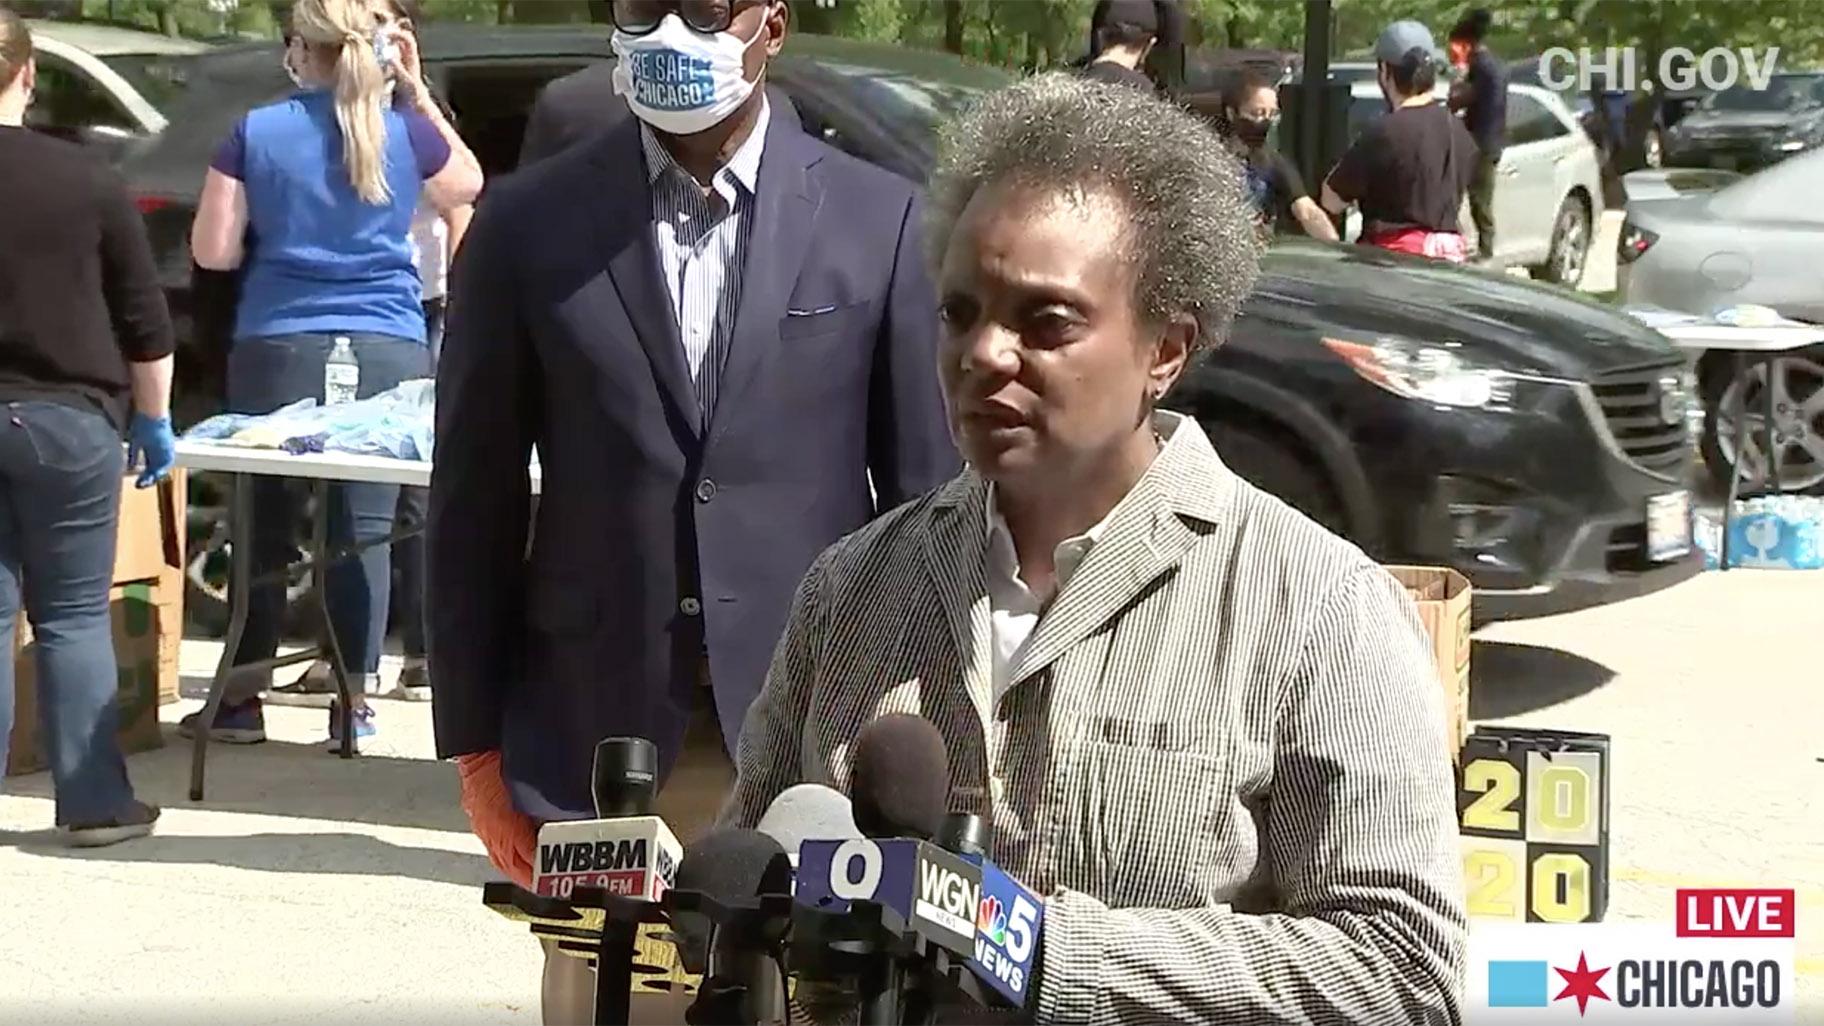 Chicago Mayor Lori Lightfoot speaks to the media Saturday, May 30, 2020, the morning after protests over the death of George Floyd took place downtown. (Chicago Mayor’s Office / Facebook)